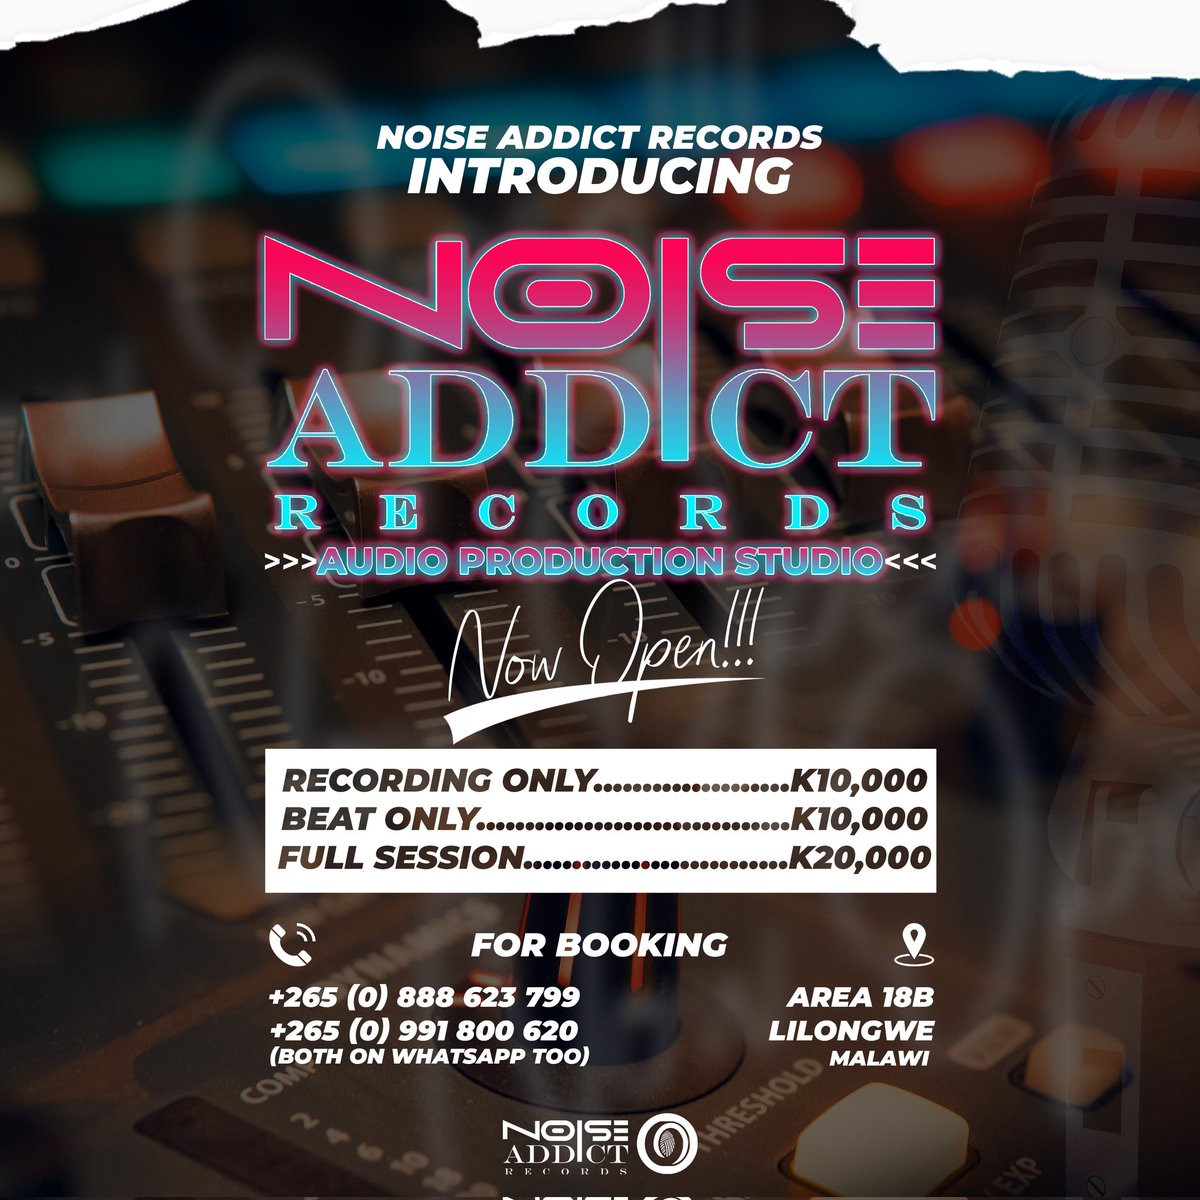 I'm glad to announce that I have opened up my own studio.. it's called Noise Addict Records' check the flyer for the prices.. y'all welcome to record ❤️ Whatsapp or call 0888623799 for session bookings.